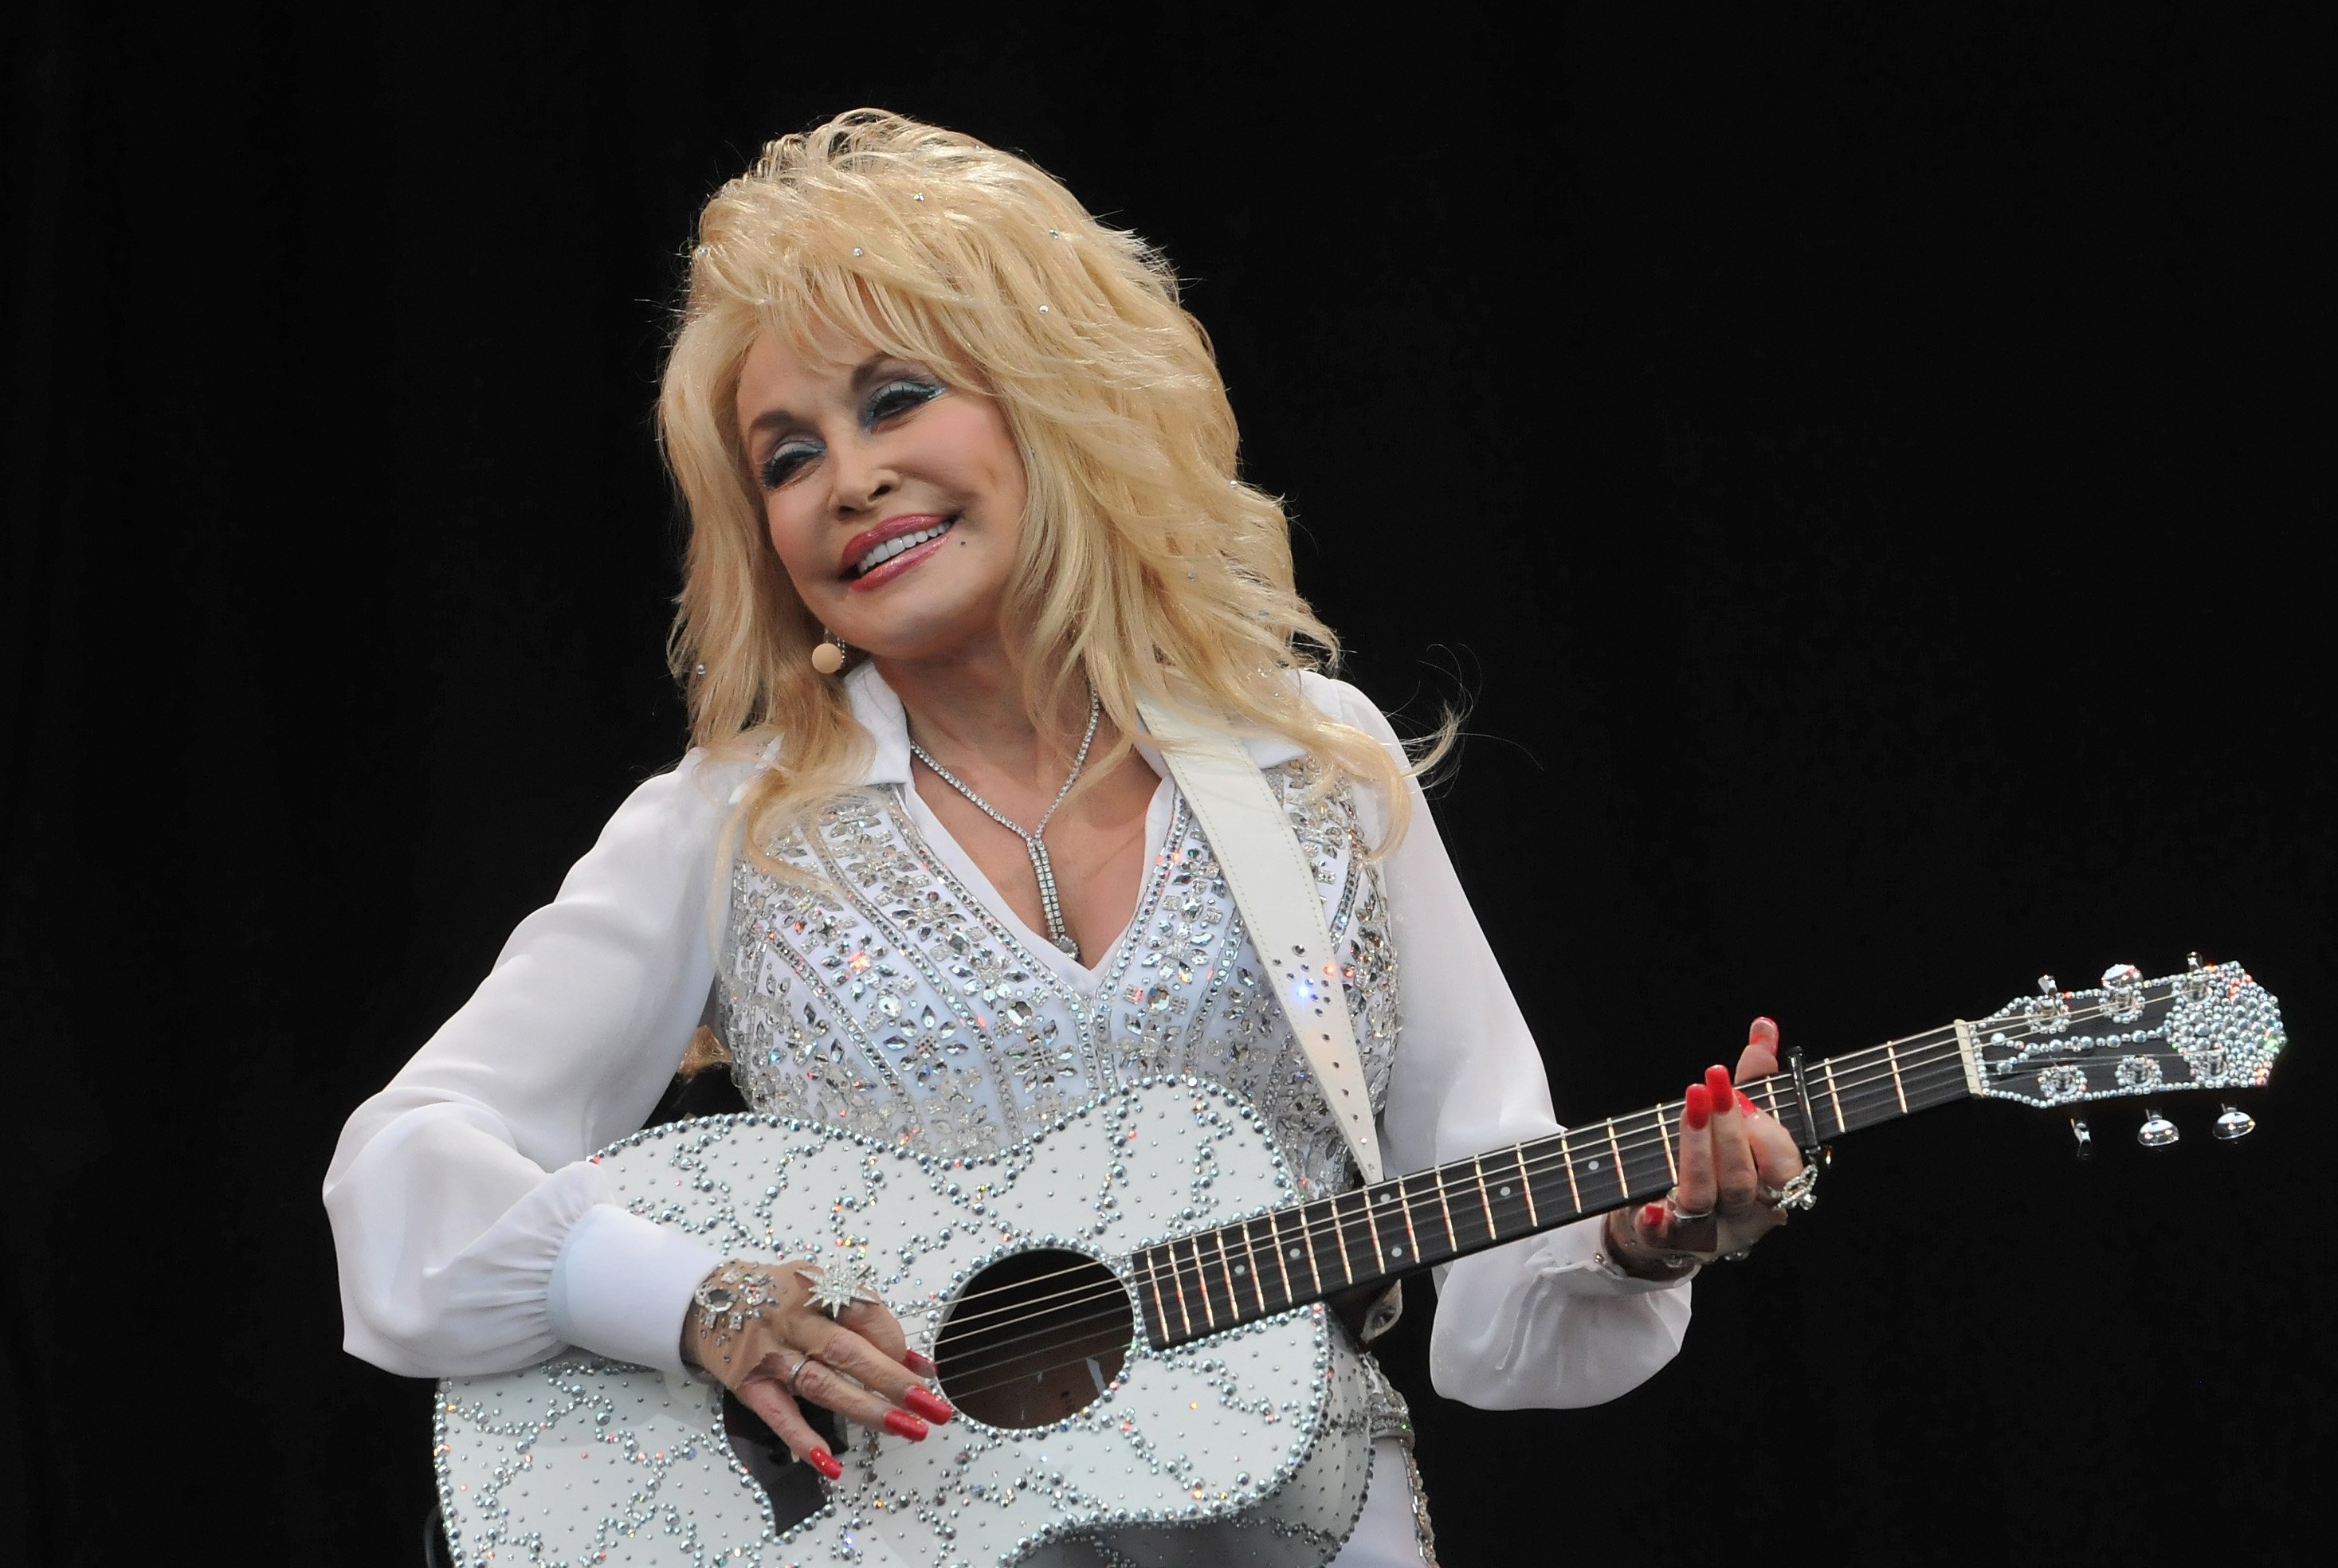 Dolly Parton in a white, sparkly shirt playing a white, sparkly guitar on stage.